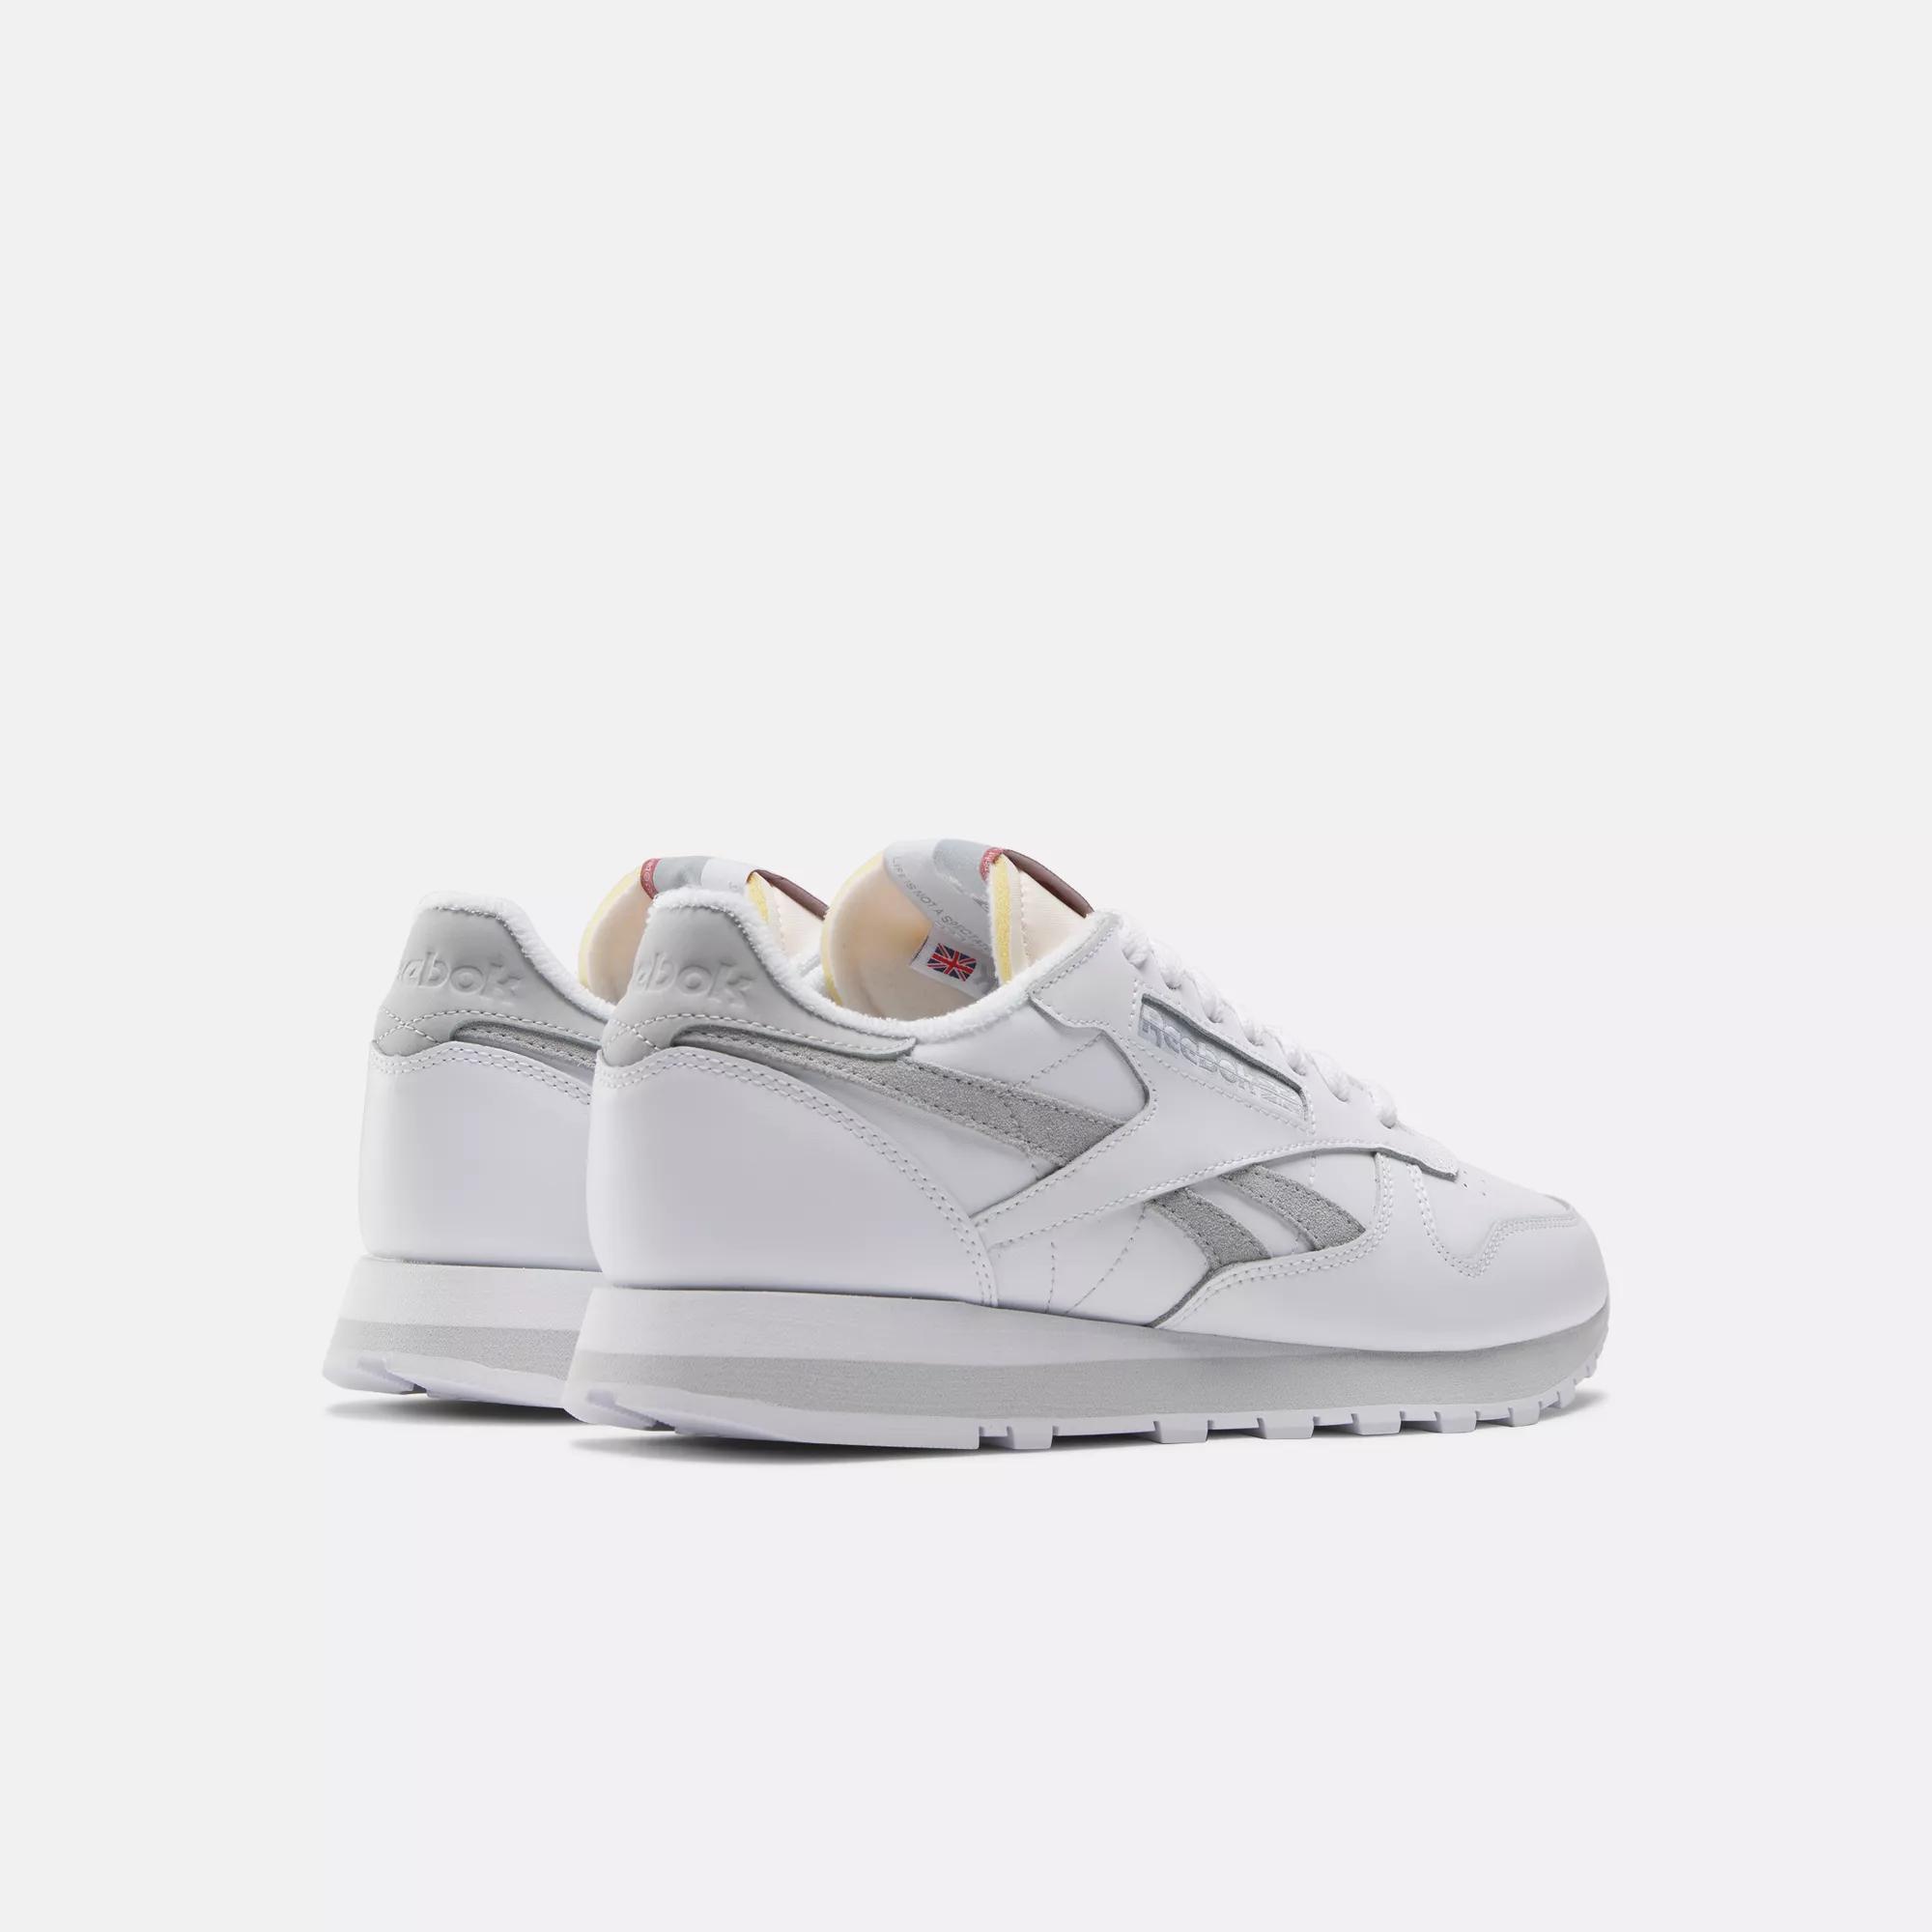 Classic Leather Shoes - Ftwr White / Pure Grey 3 / Pure Grey 2 | Reebok